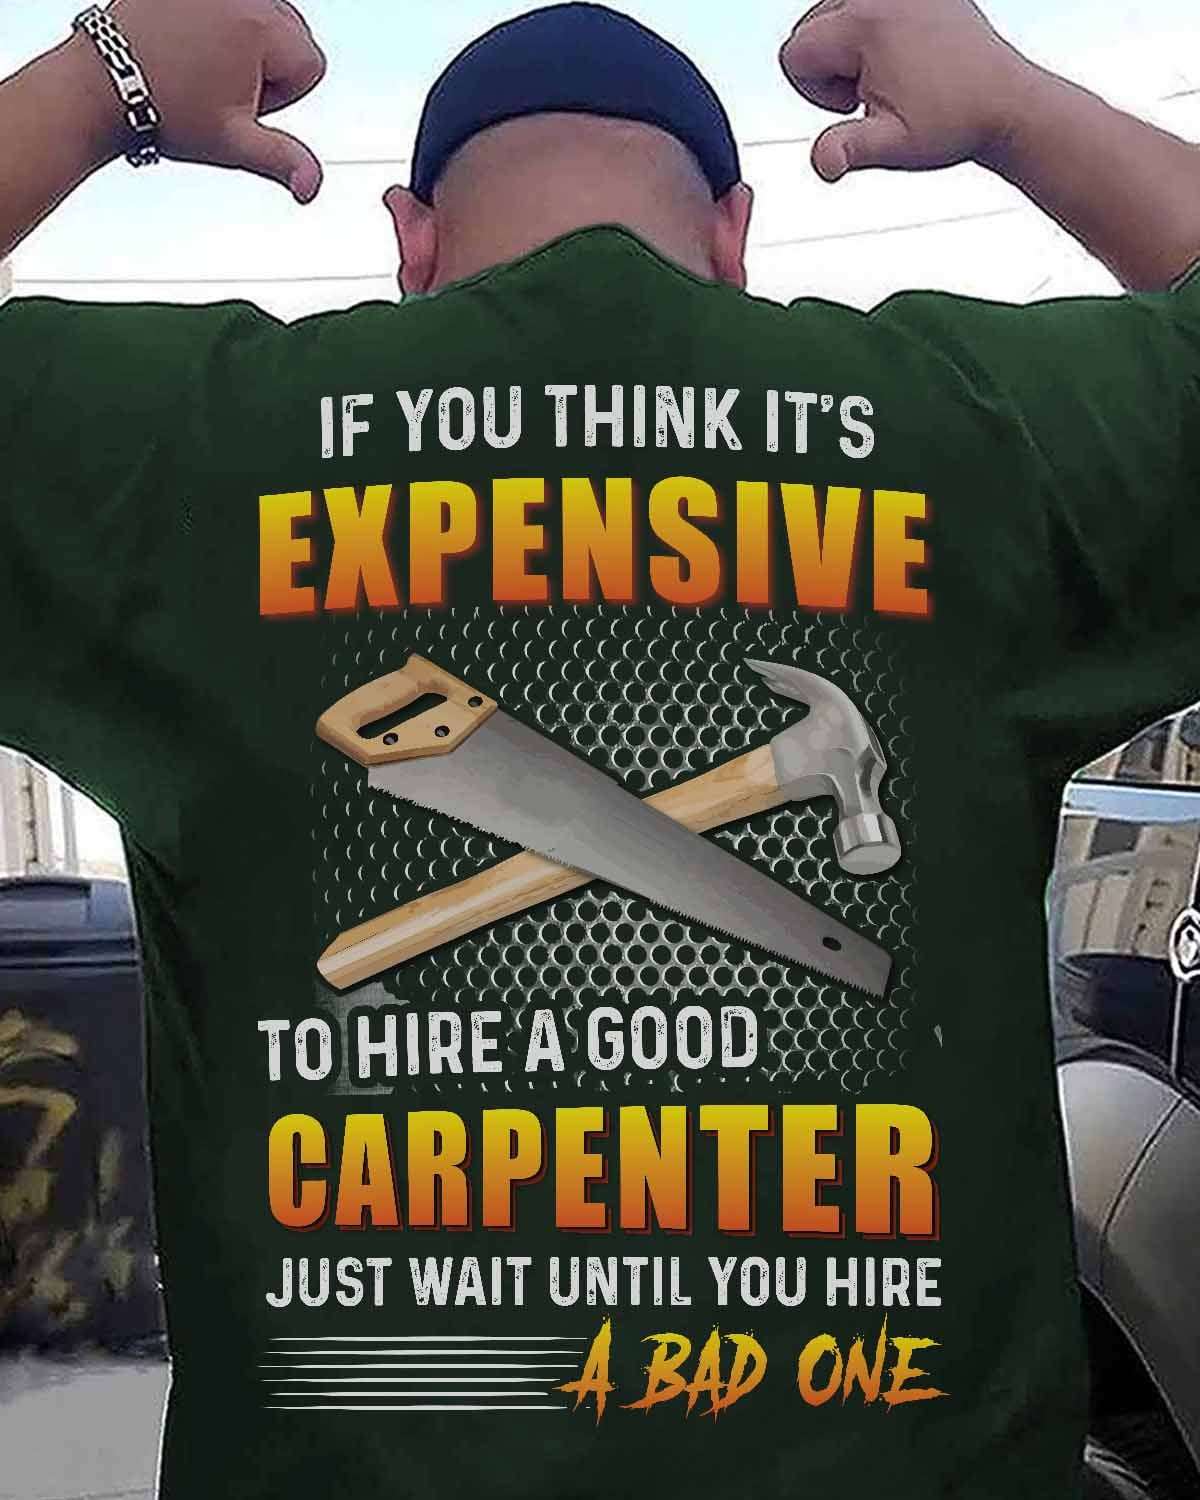 Good Carpenter - If you think it's expensive to hire a good carpenter just want until you hire a bad one